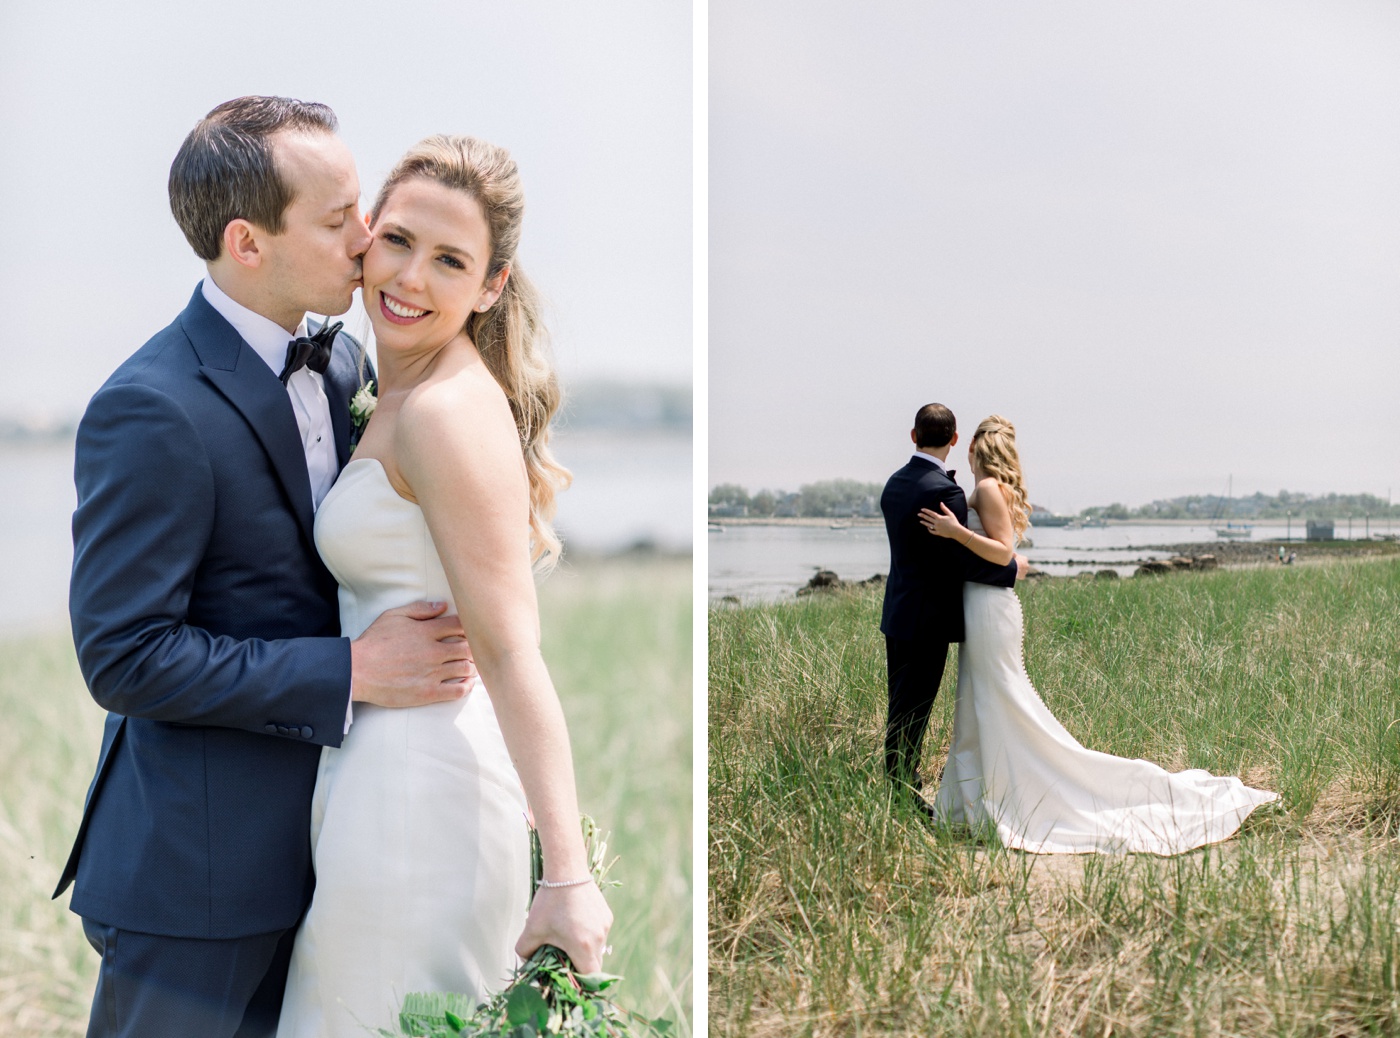 Bridal portraits on the beach in Scituate, MA